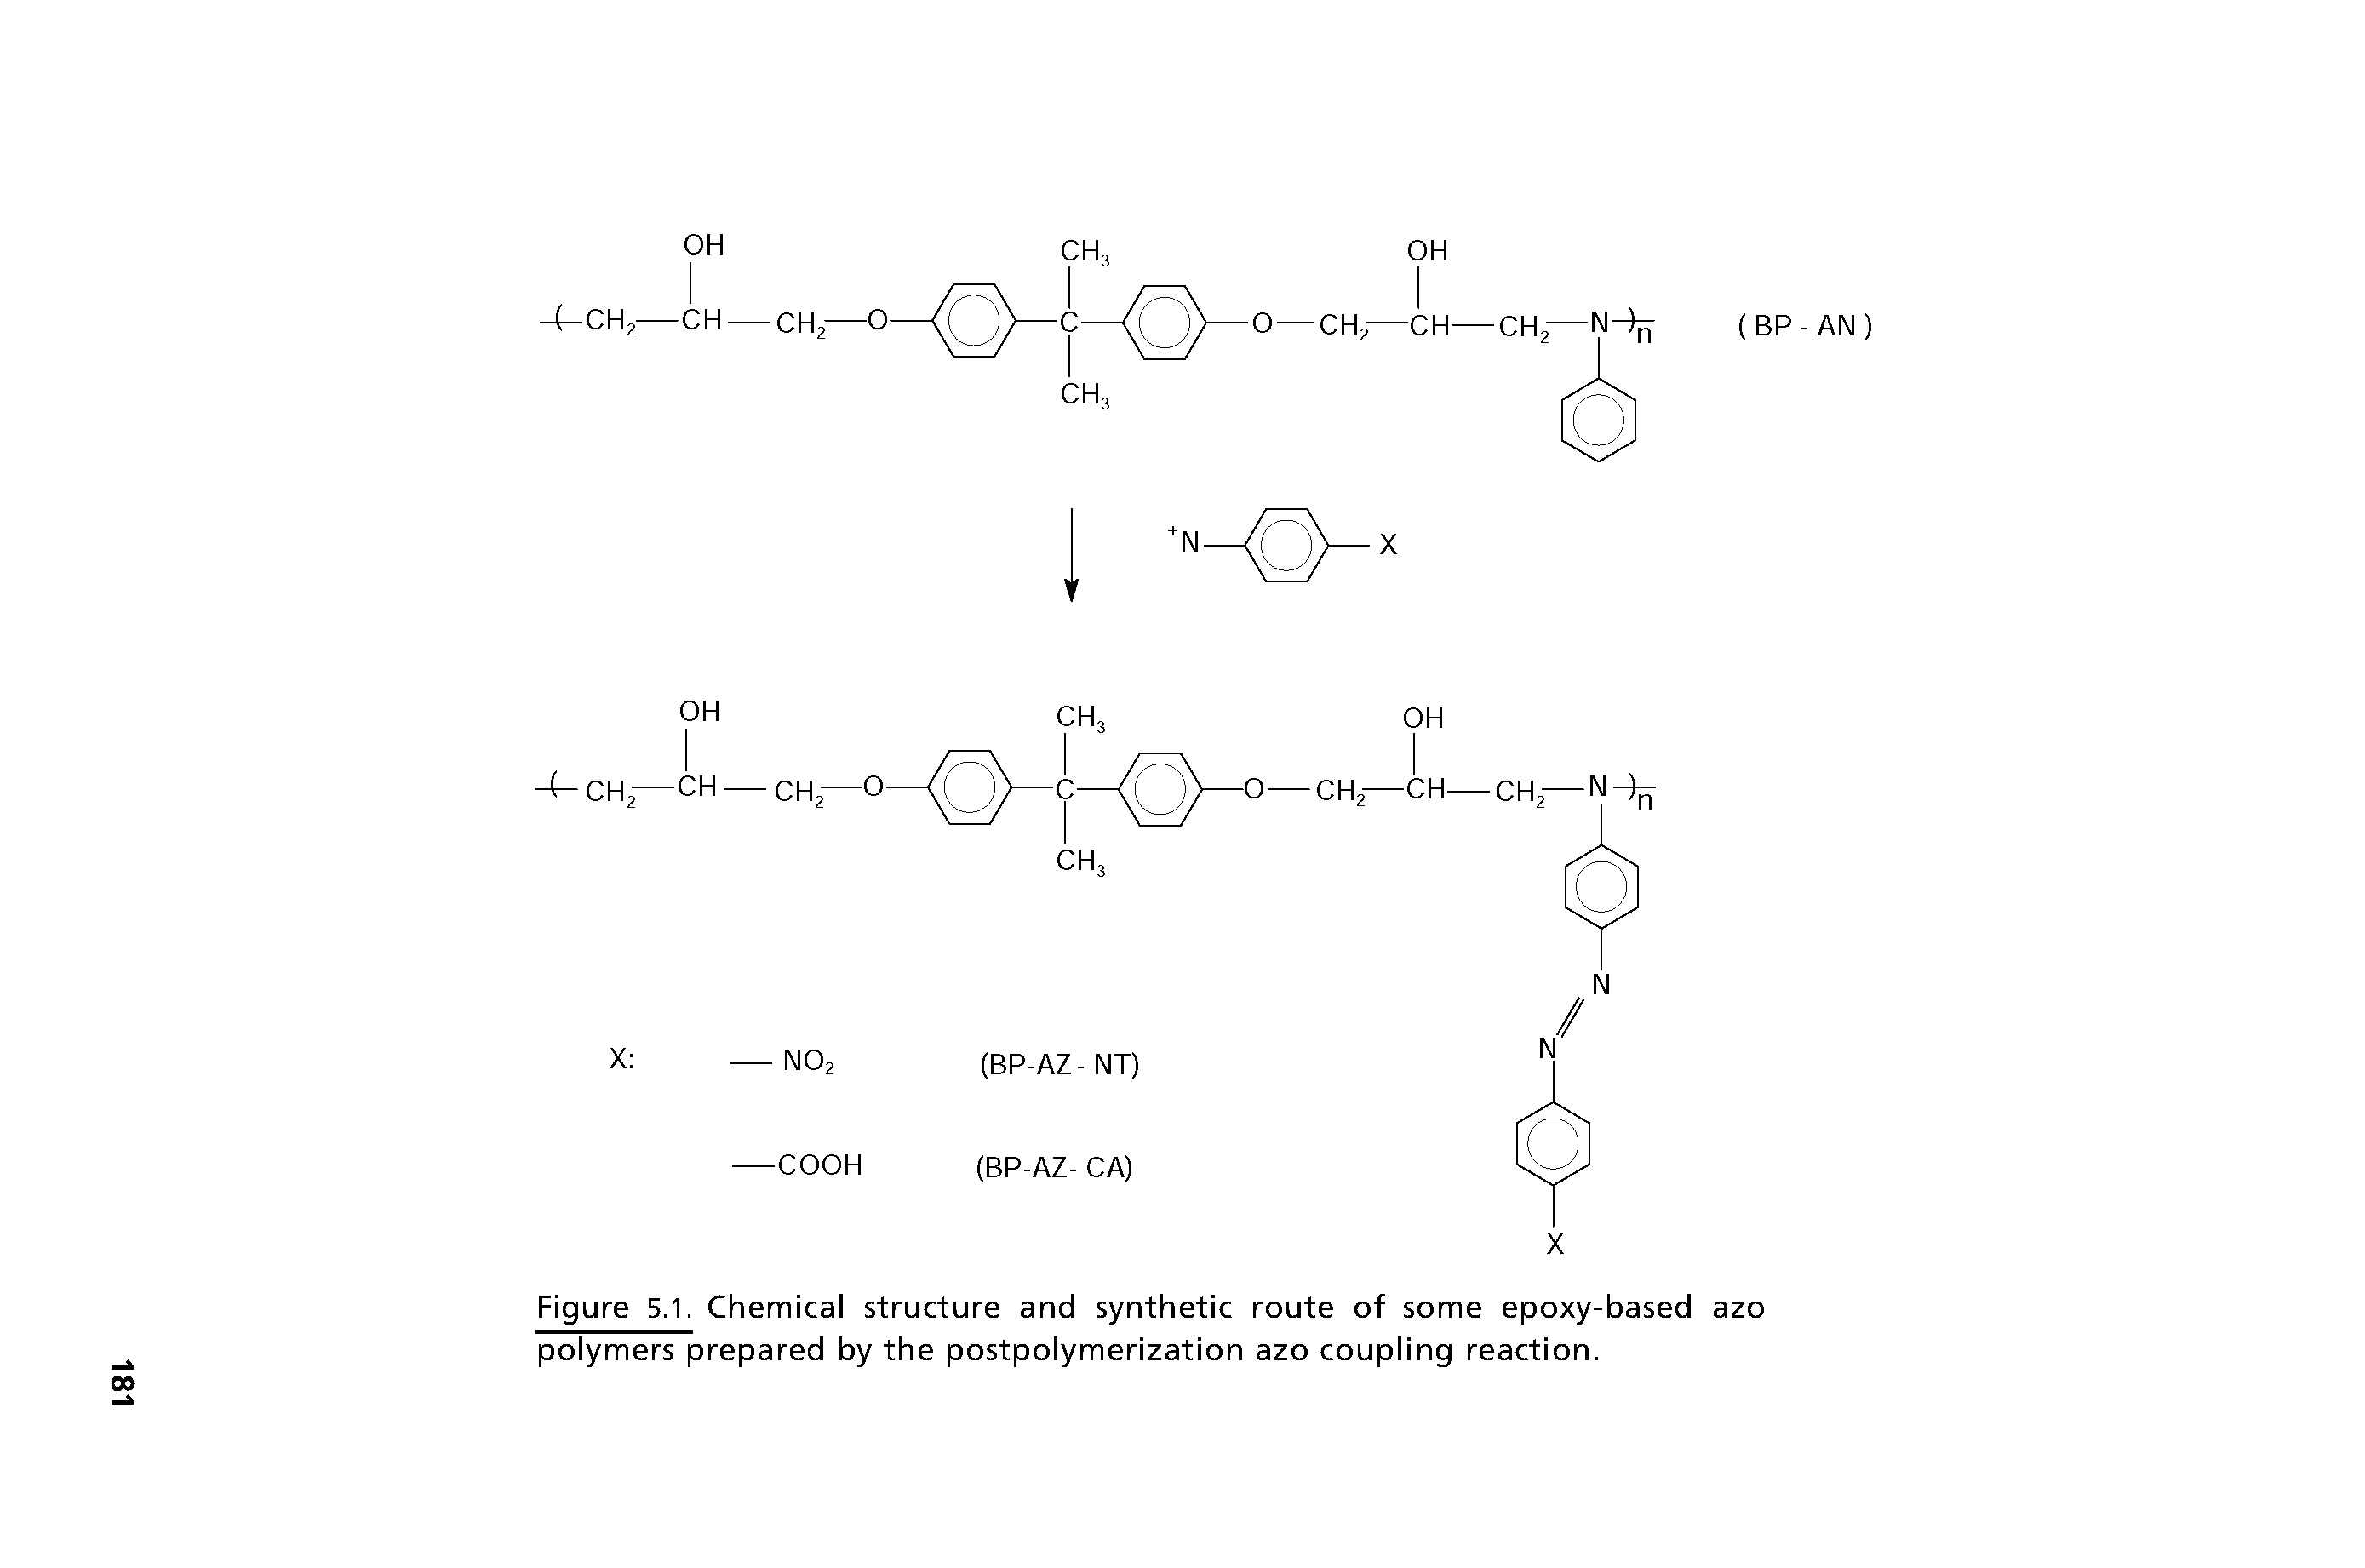 Figure 5.1. Chemical structure and synthetic route of some epoxy-based azo polymers prepared by the postpolymerization azo coupling reaction.